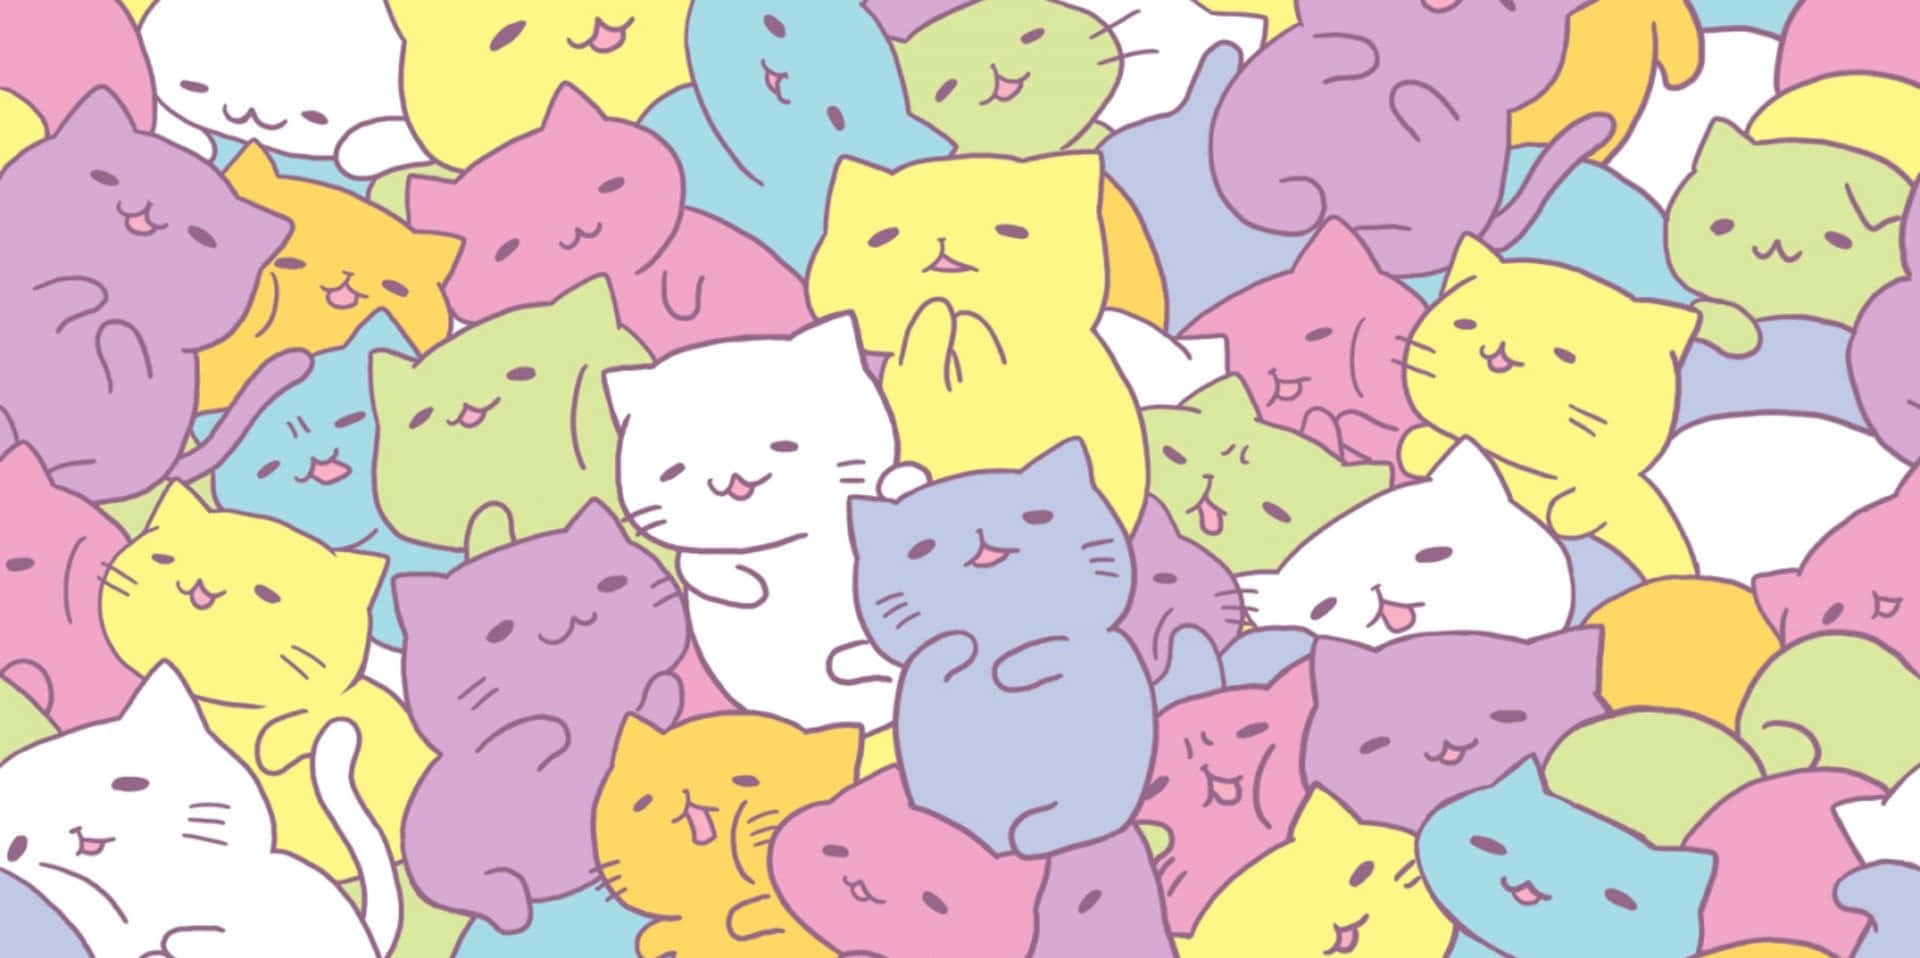 Explore the World with This Kawaii Pastel Laptop Wallpaper